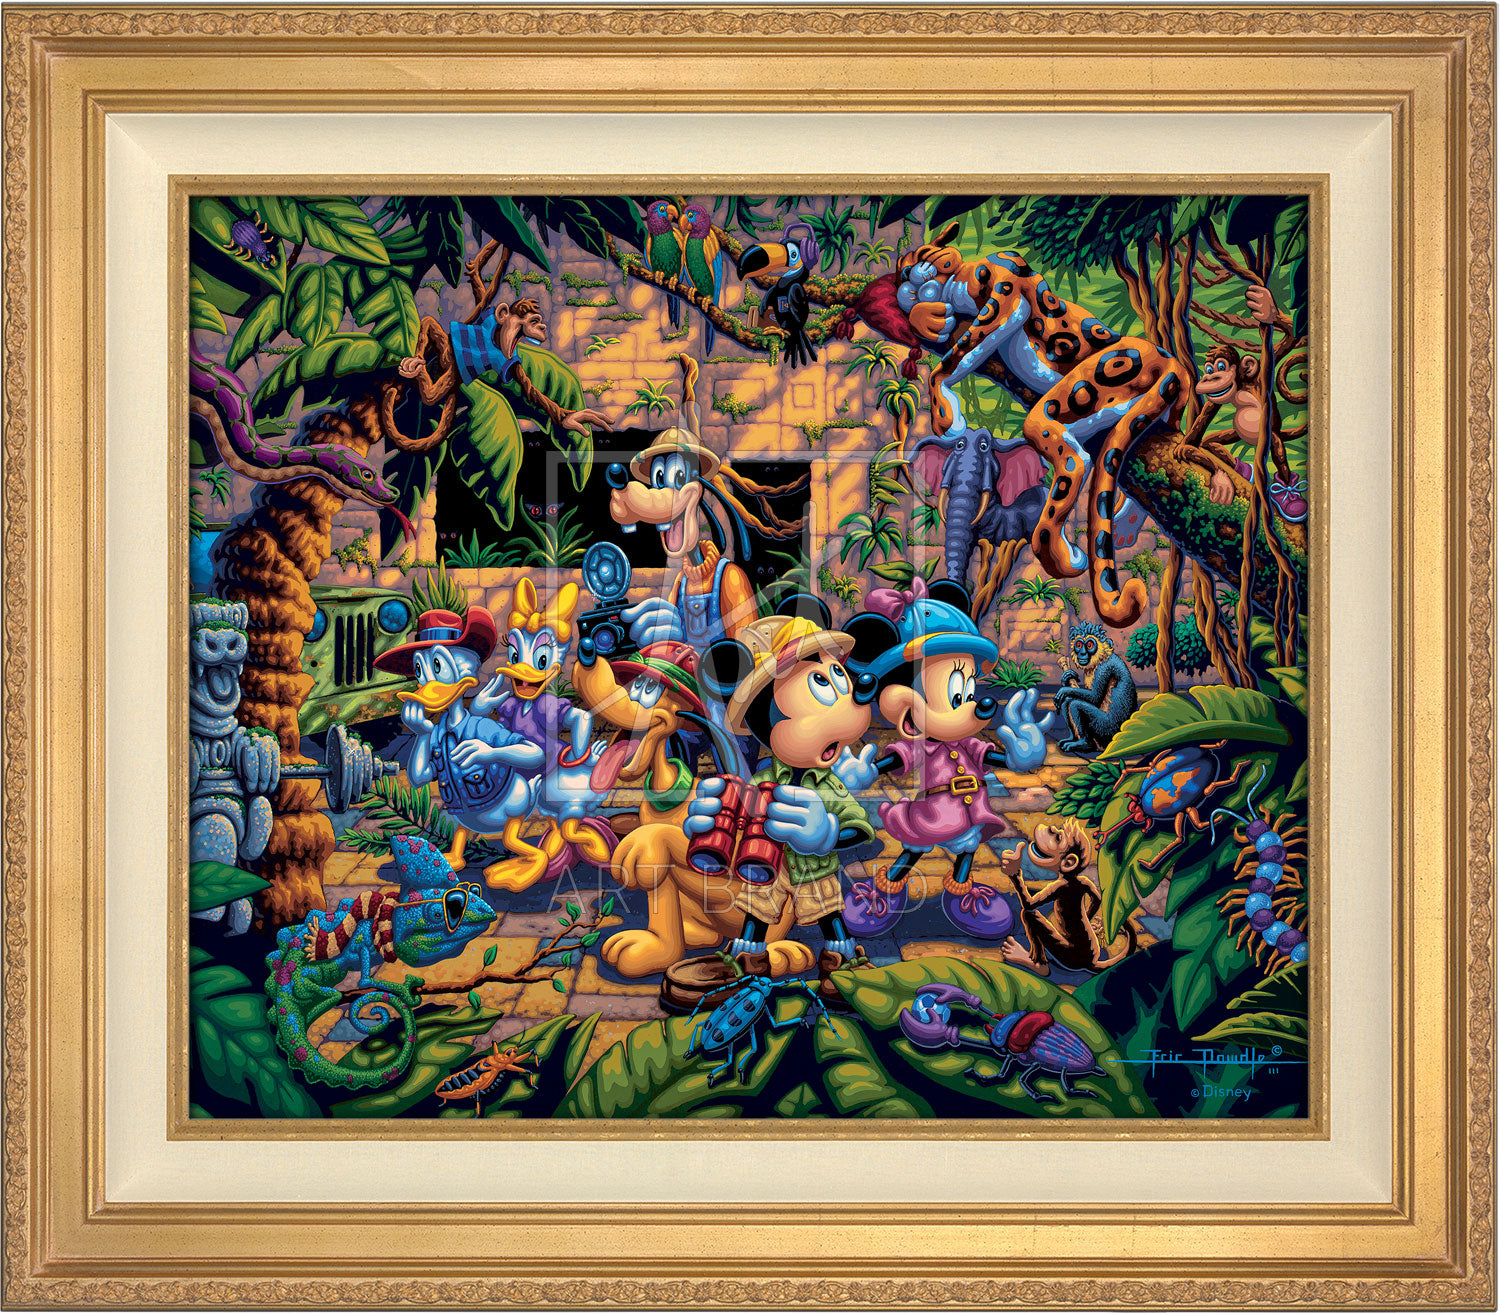 The lush jungle vegetation supports a variety of creatures great and small, including a chameleon, a variety of insects, a snake, birds, monkeys, and even a leopard and an elephant. Mickey and friends find themselves in the center of it all! - Antique Gold frame